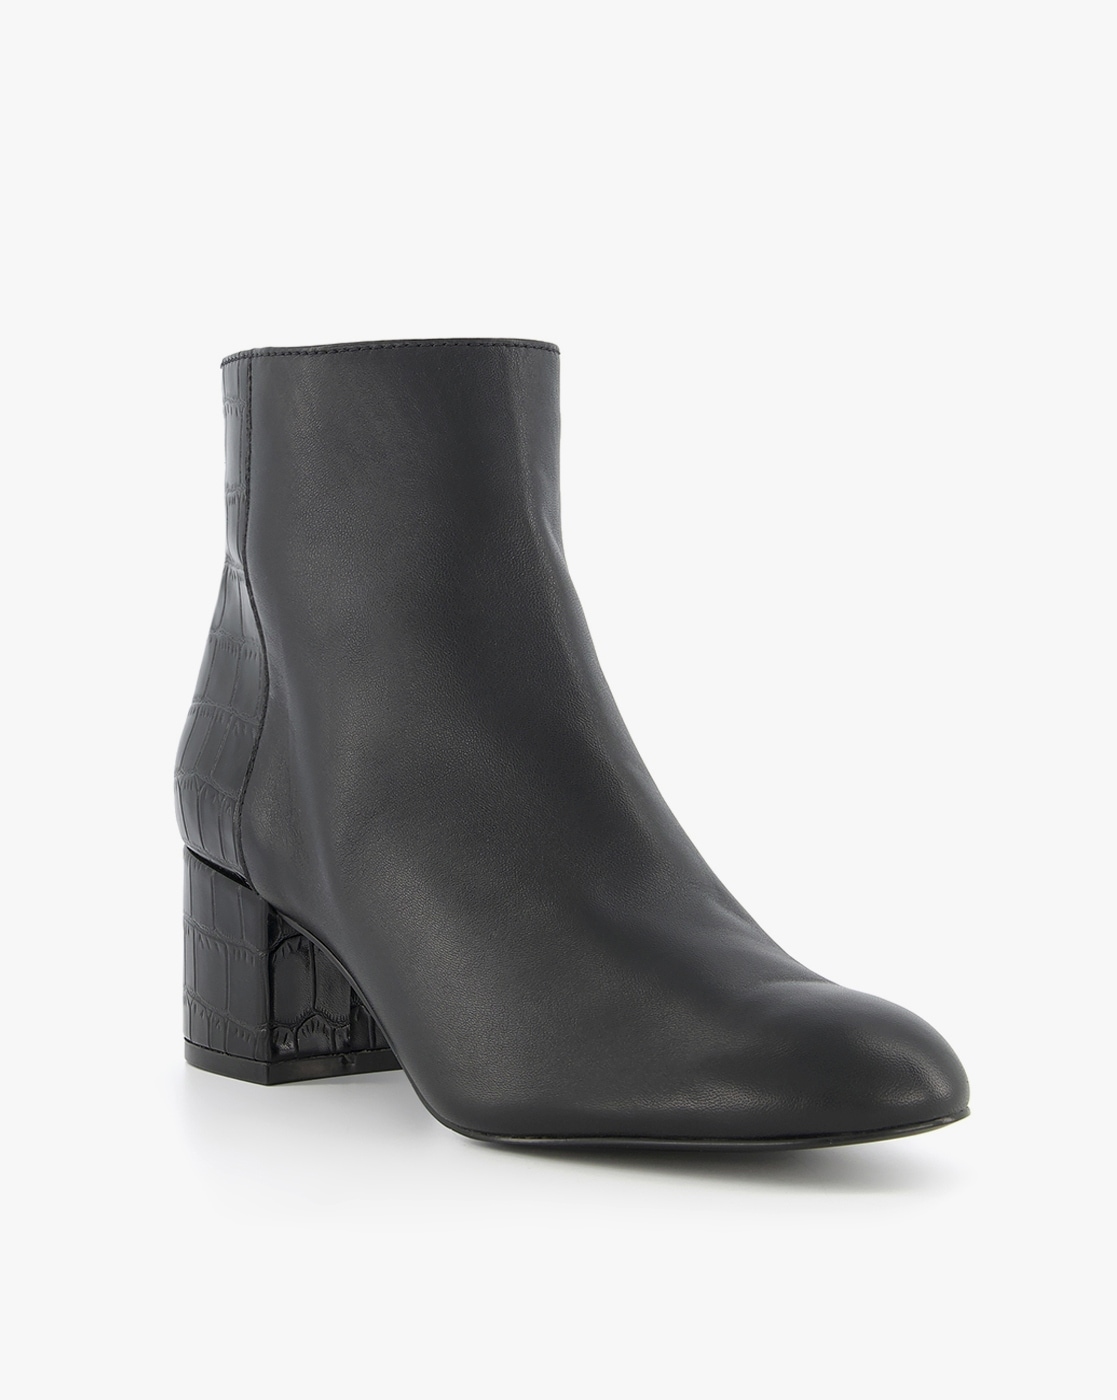 Buy Black Boots for Women by Everqupid Online | Ajio.com